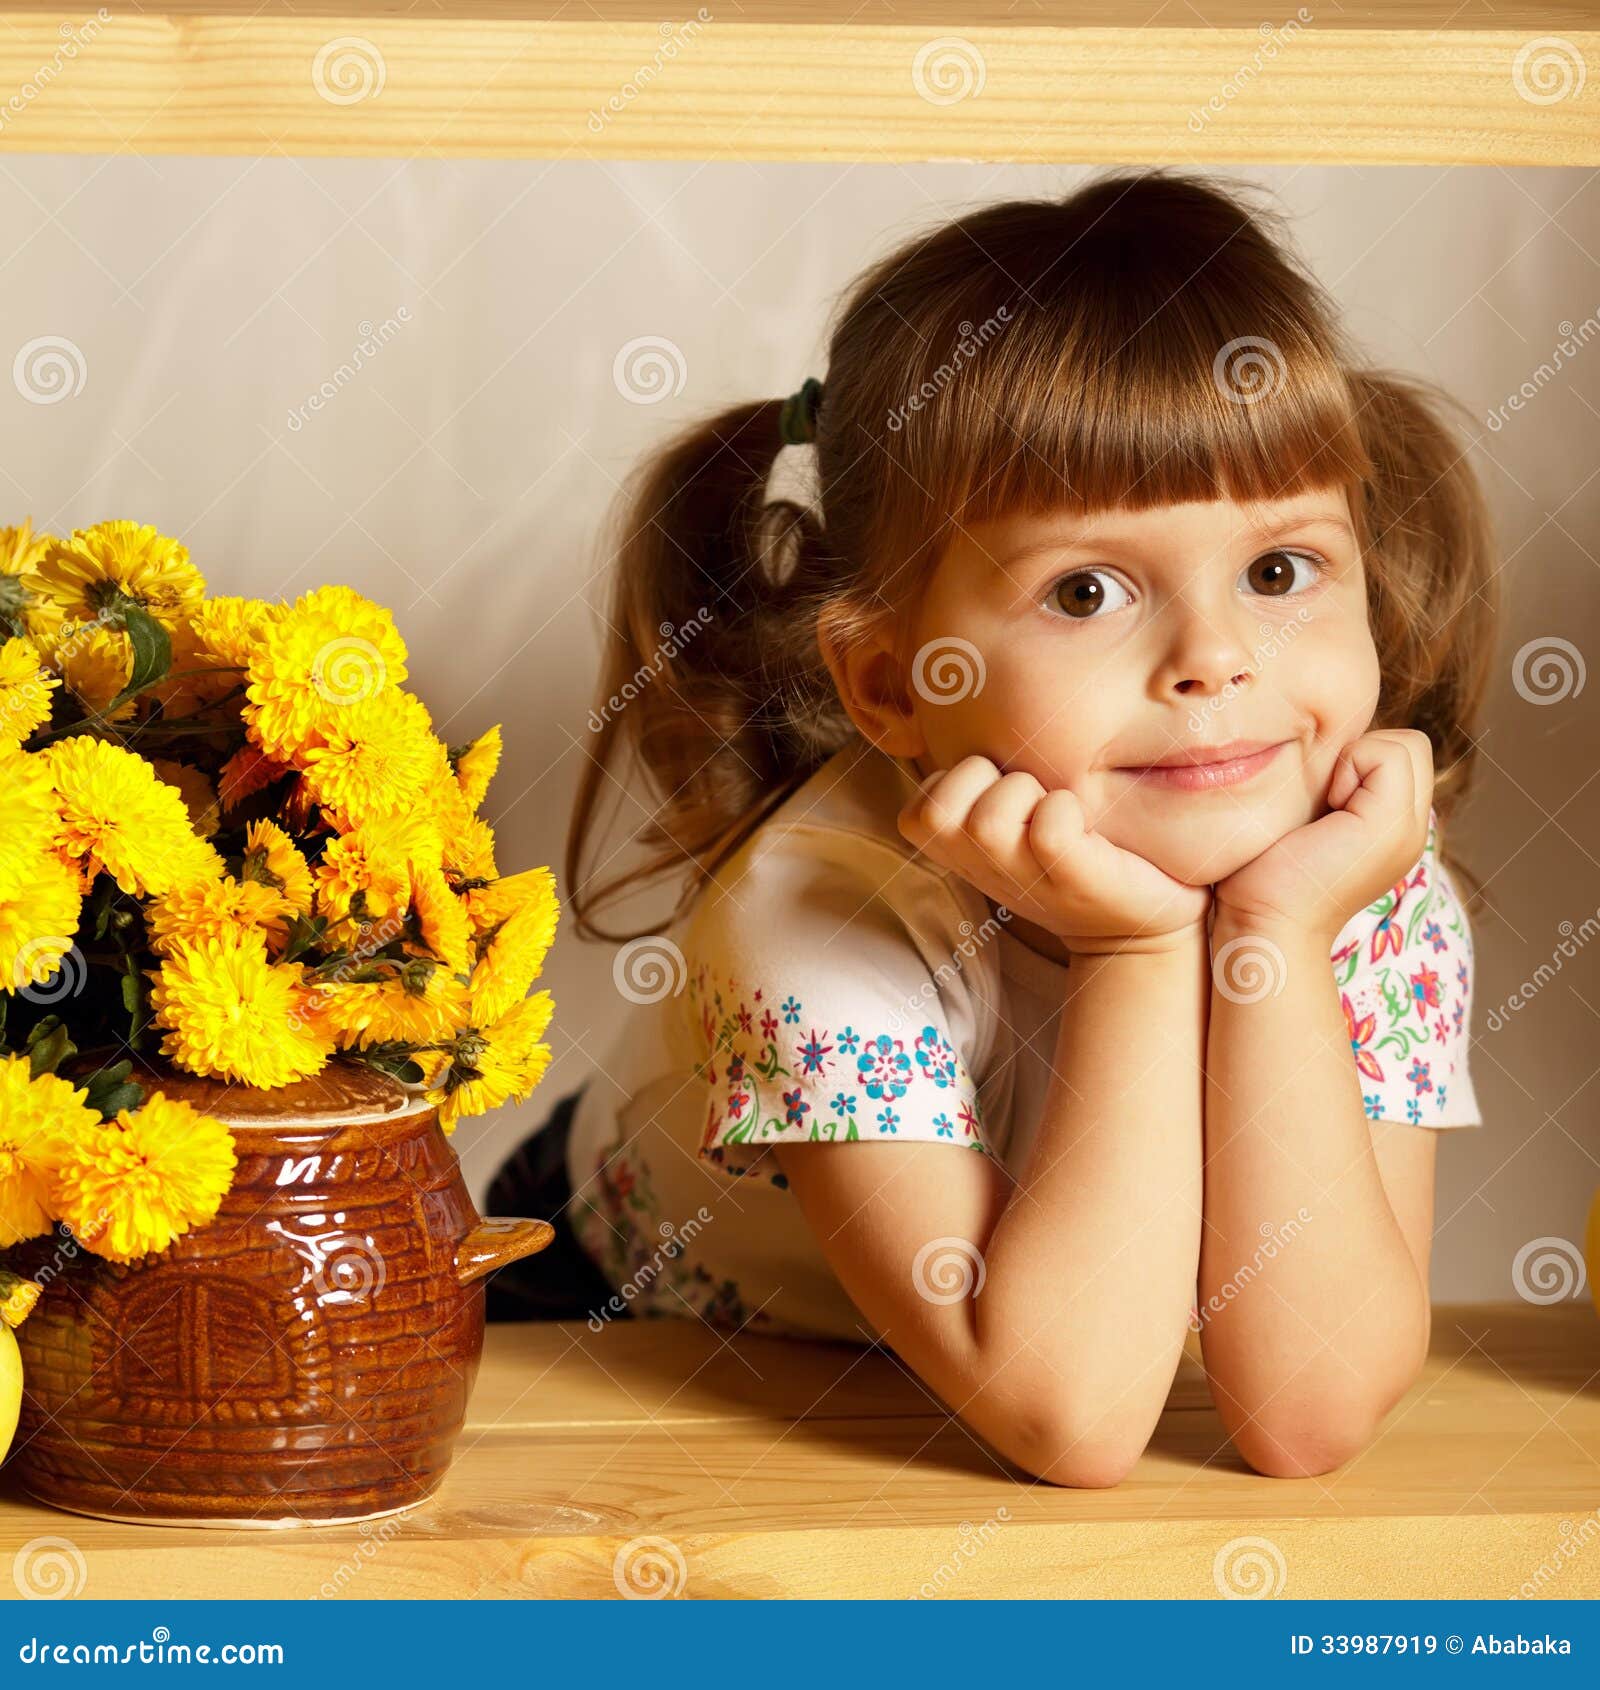 Little Cute Girl With A Pot Of Honey Stock Image - Image: 33987919